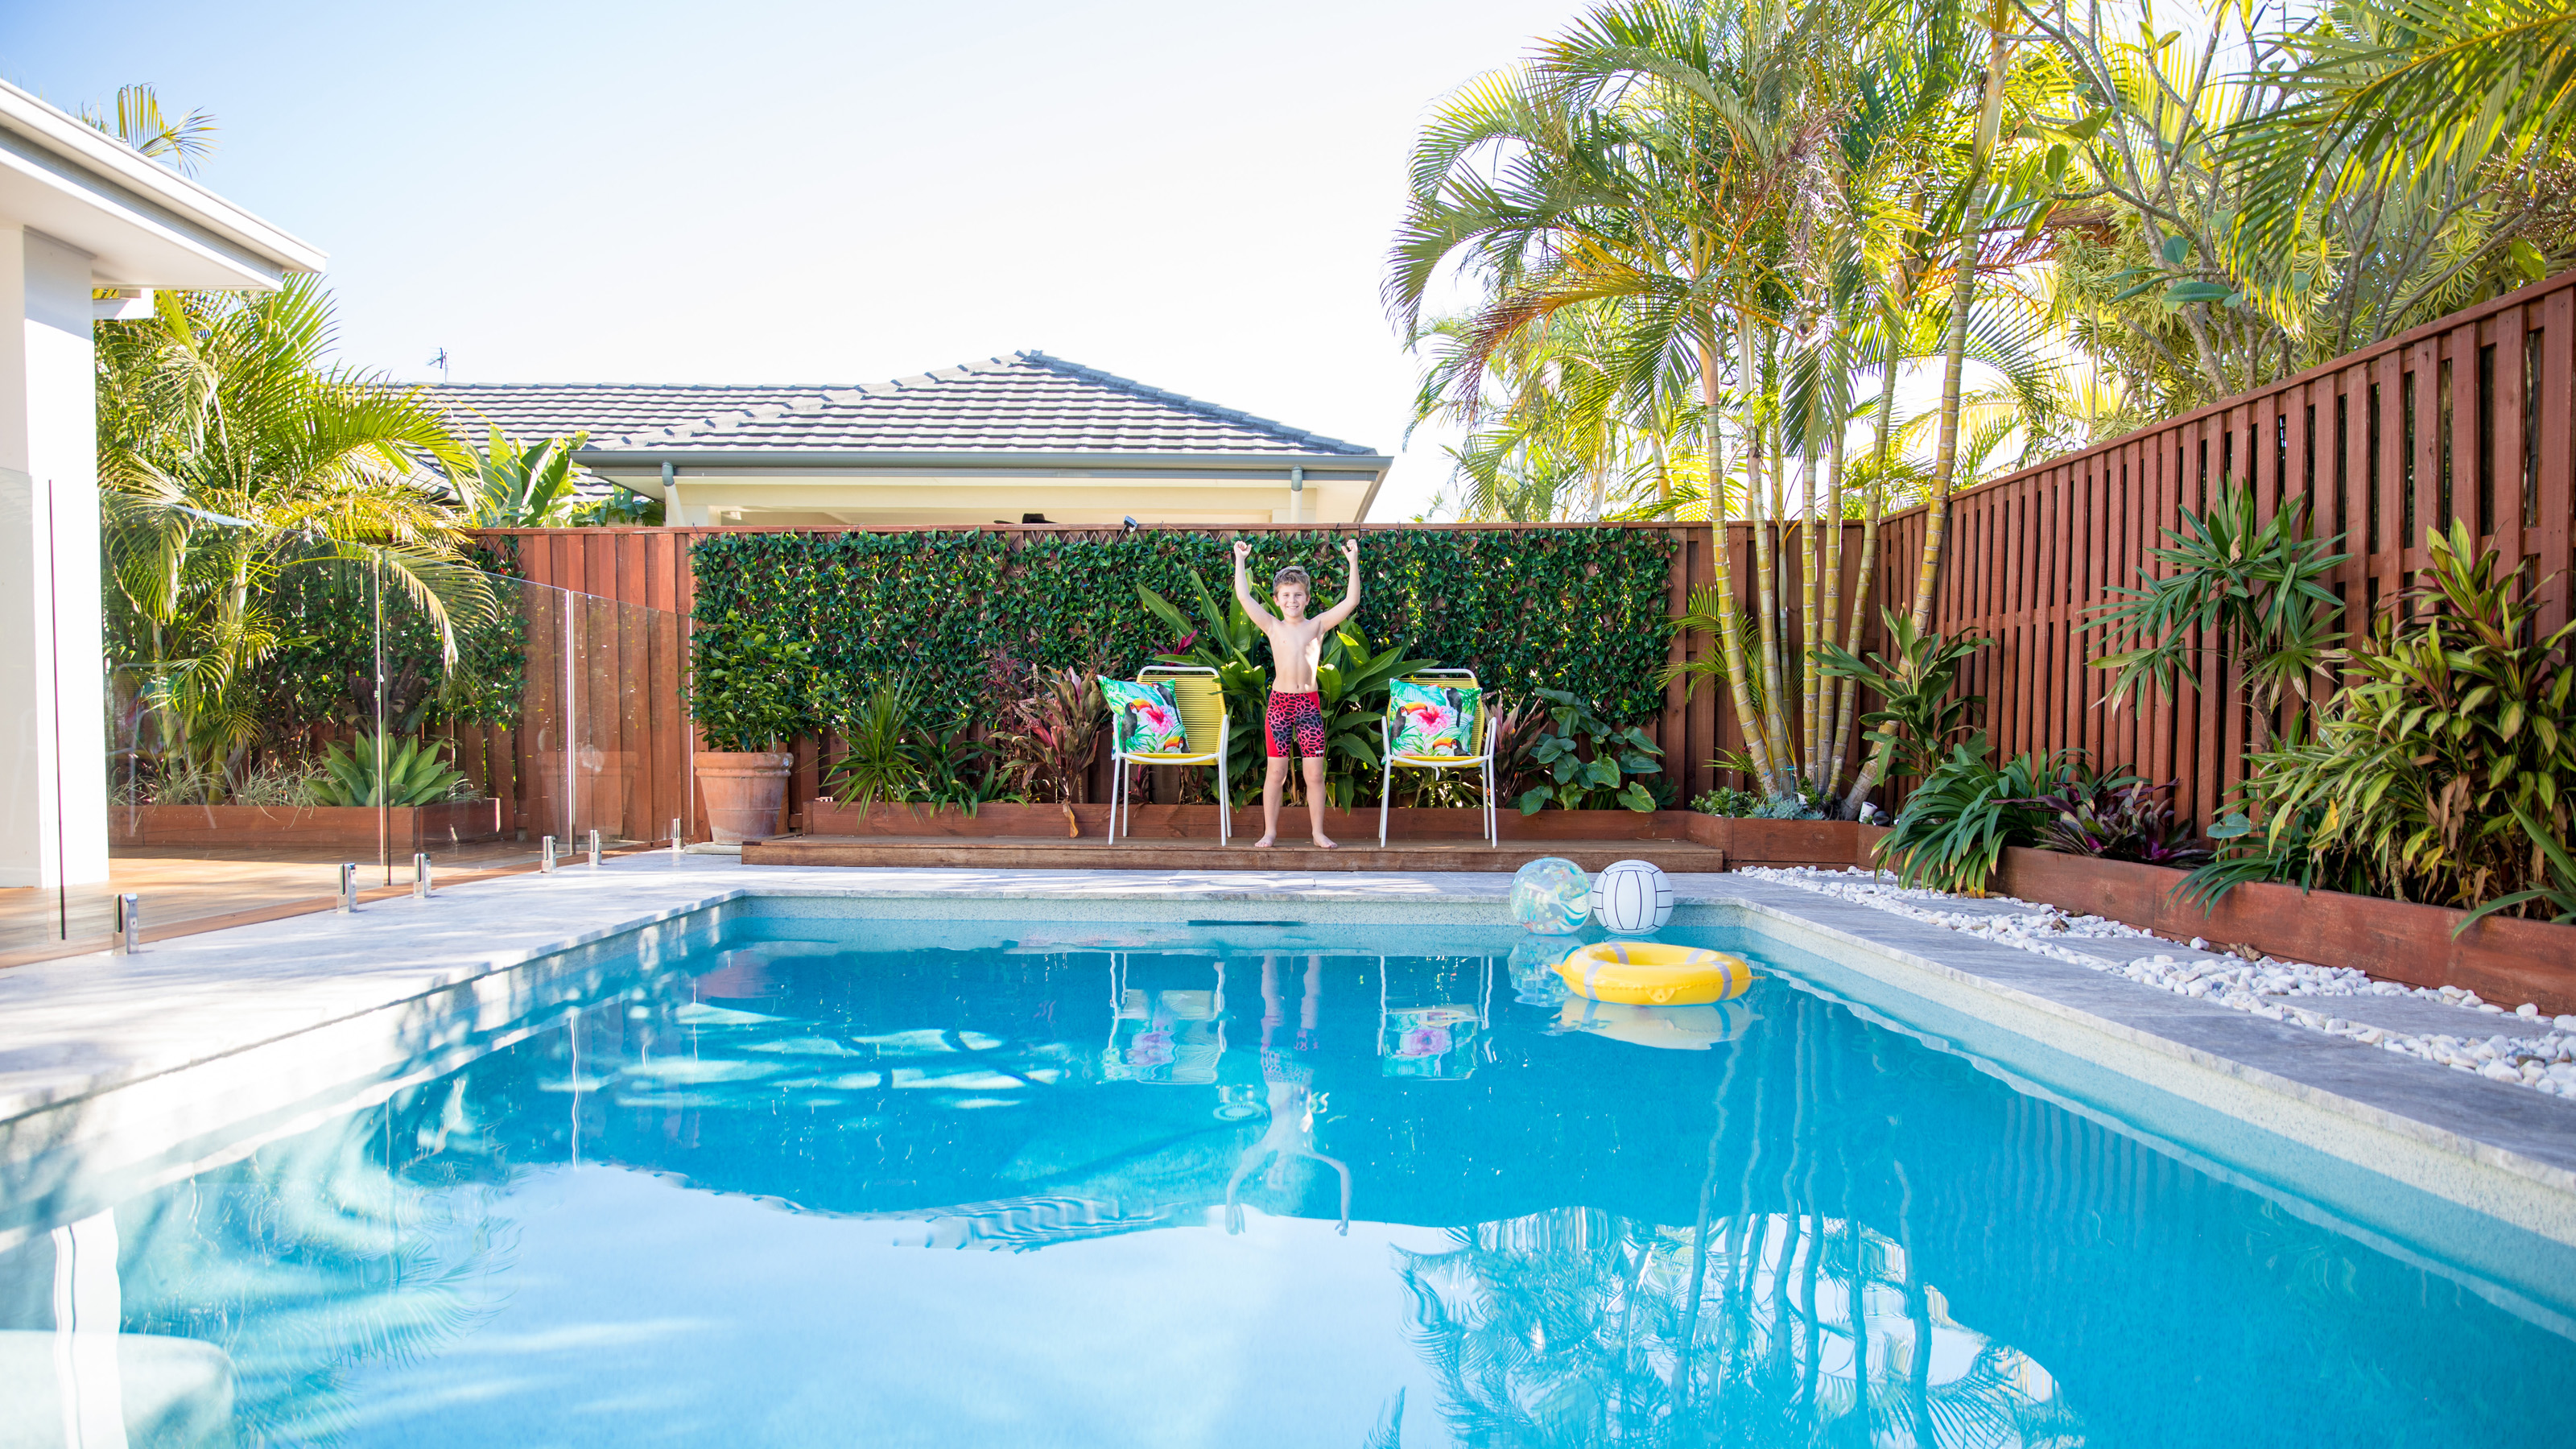 Pool Fence Ideas: 12 Ways To Surround Your Pool In Style | Gardeningetc